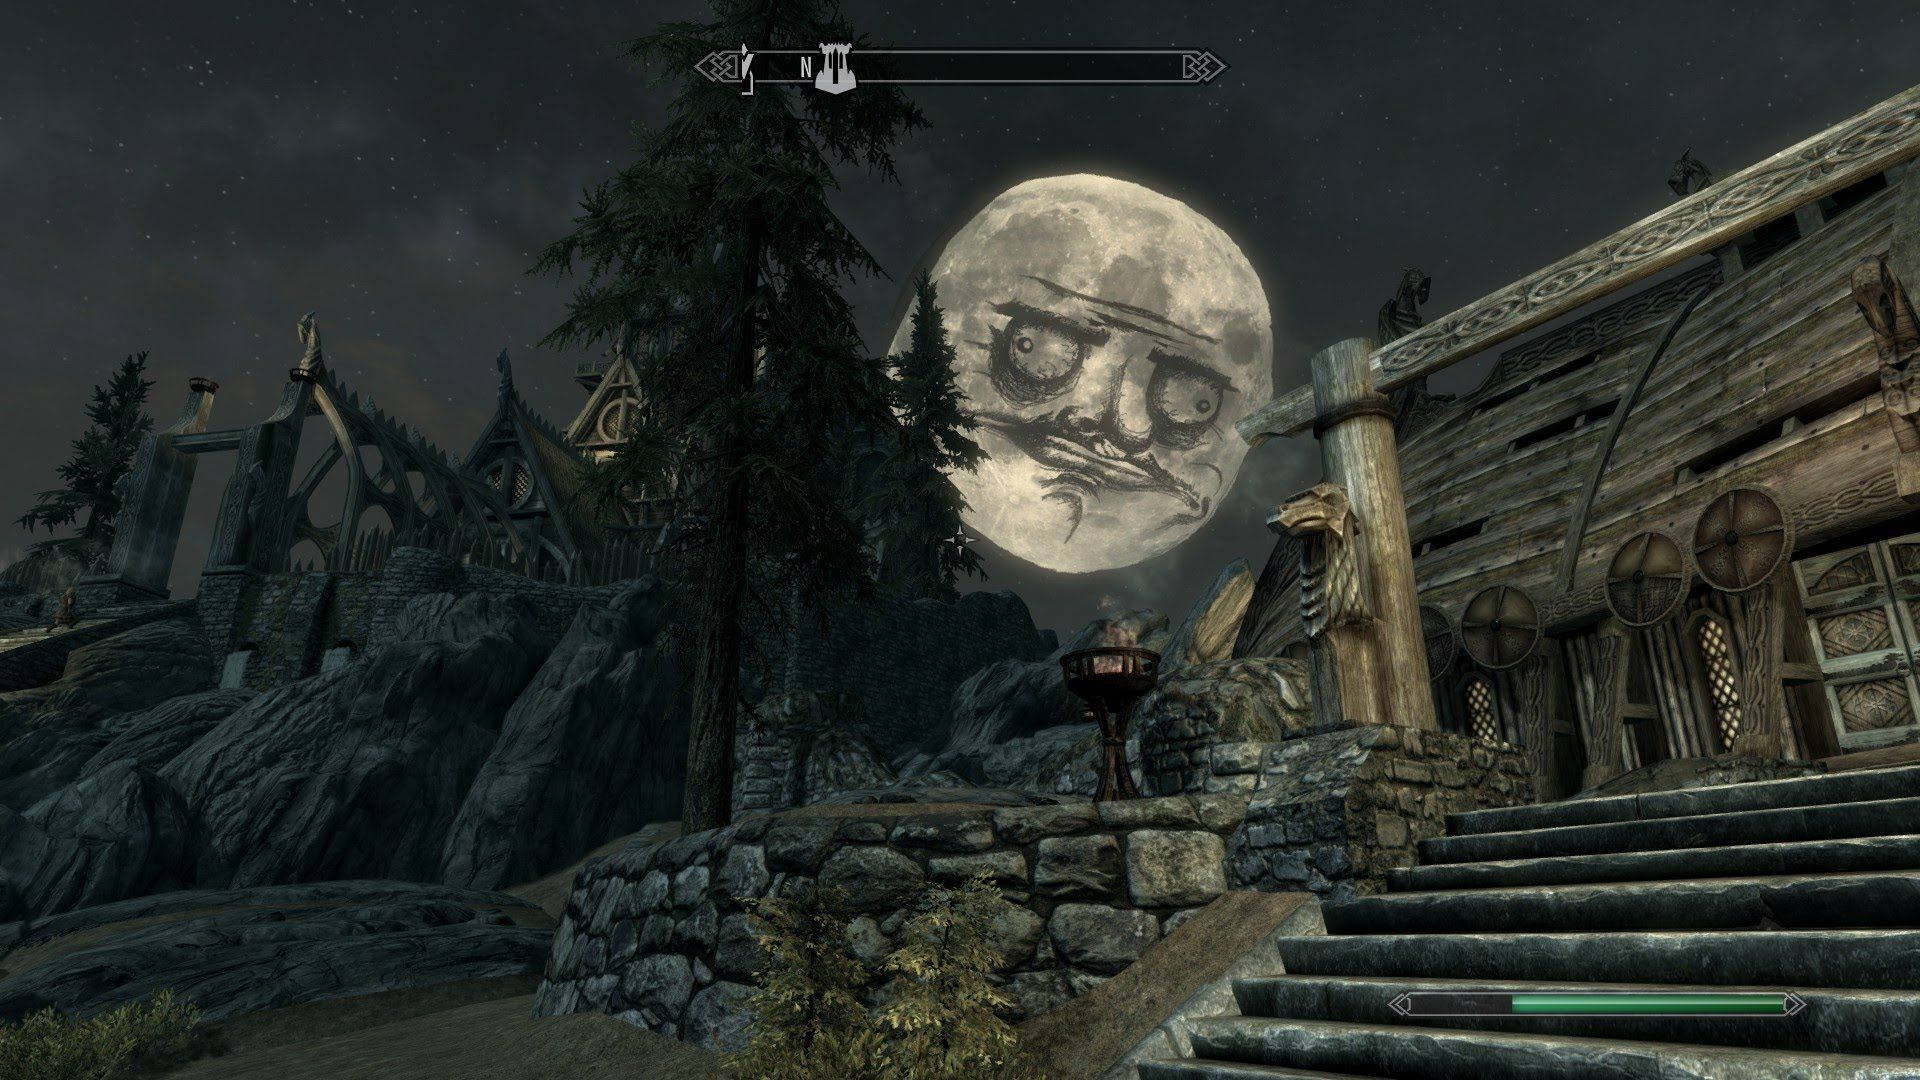 Explore the world of Tamriel with Skyrim Ultra HD Wallpaper